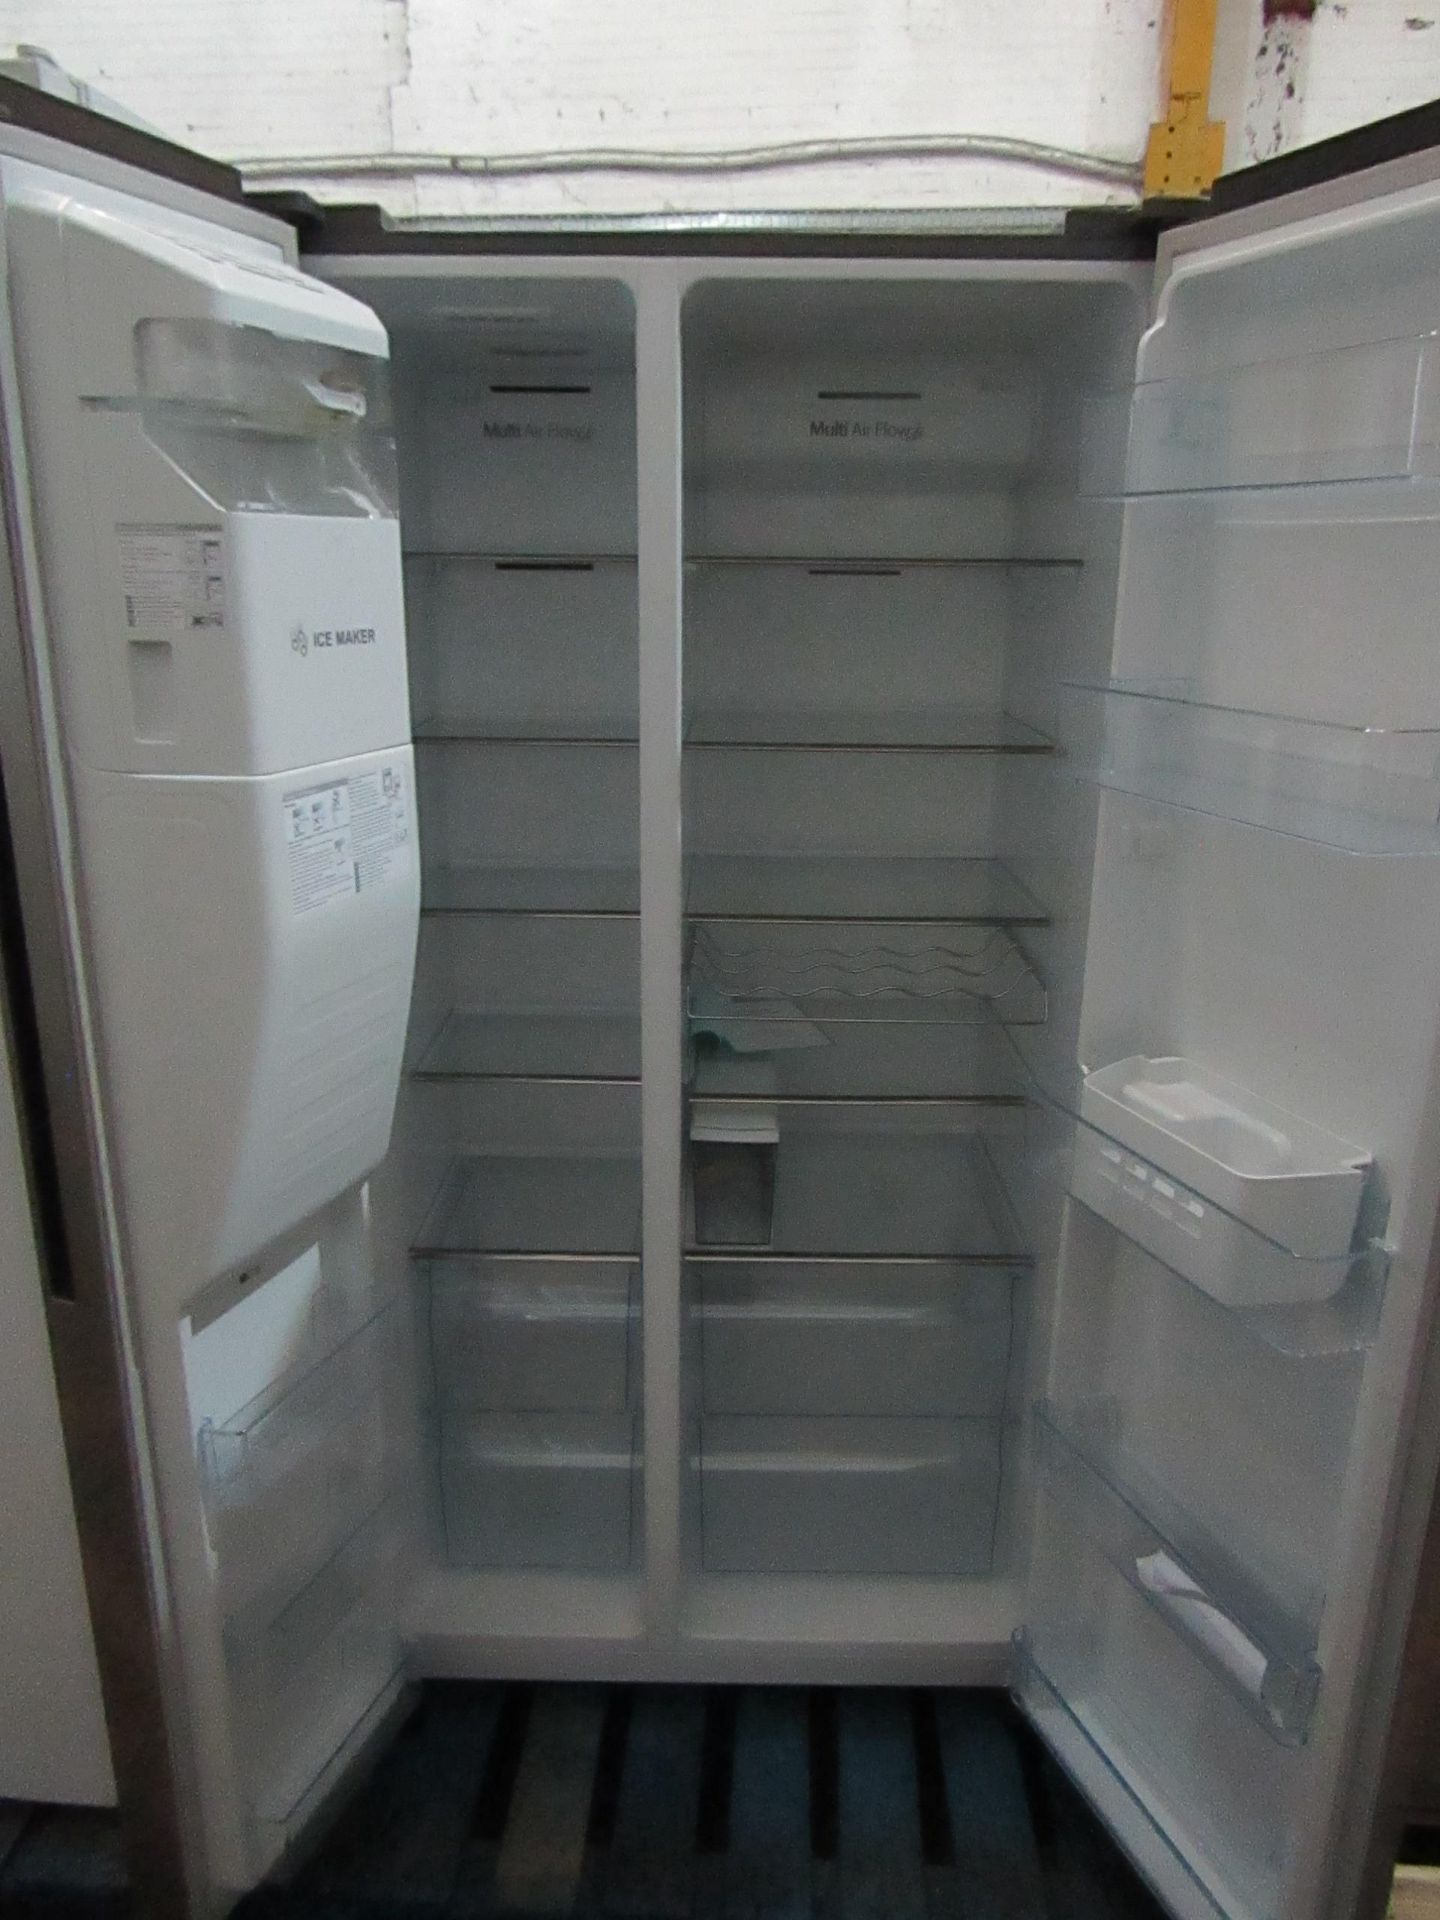 Hisense American style fridge freezer with water dispenser, tested working for cold ness, water - Image 2 of 2